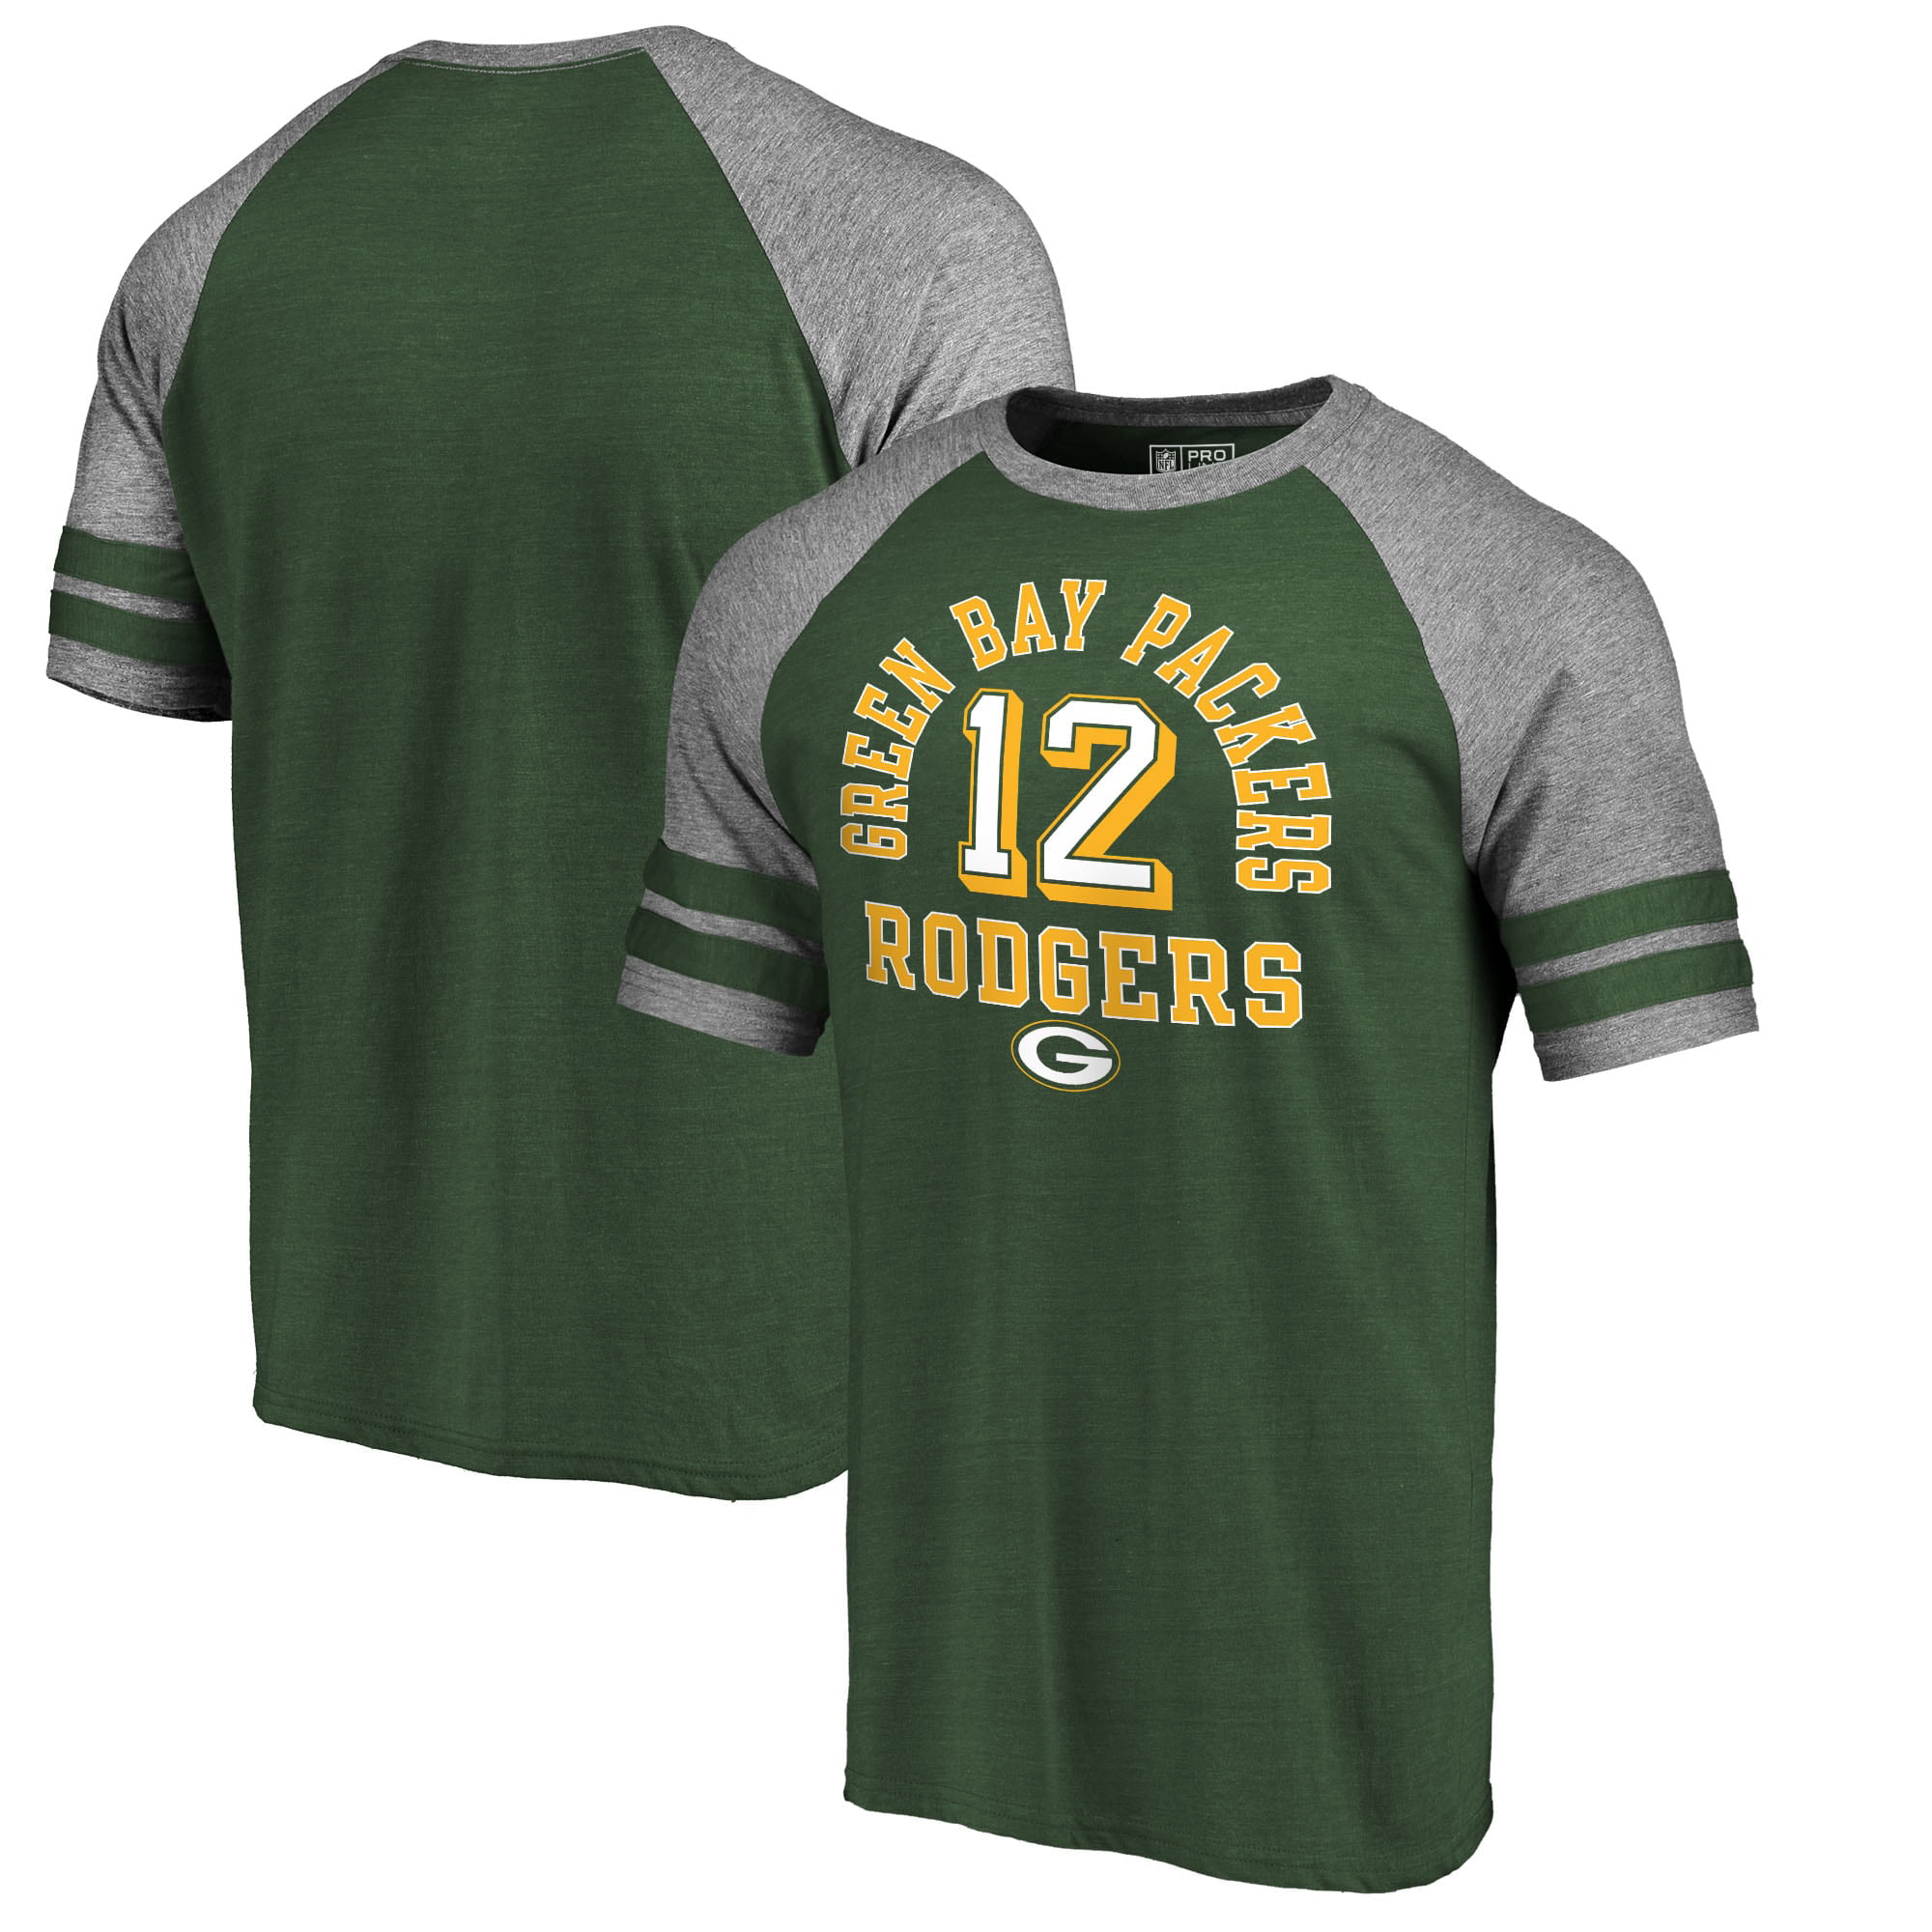 Aaron Rodgers Green Bay Packers NFL Pro Line by Fanatics Branded Team ...